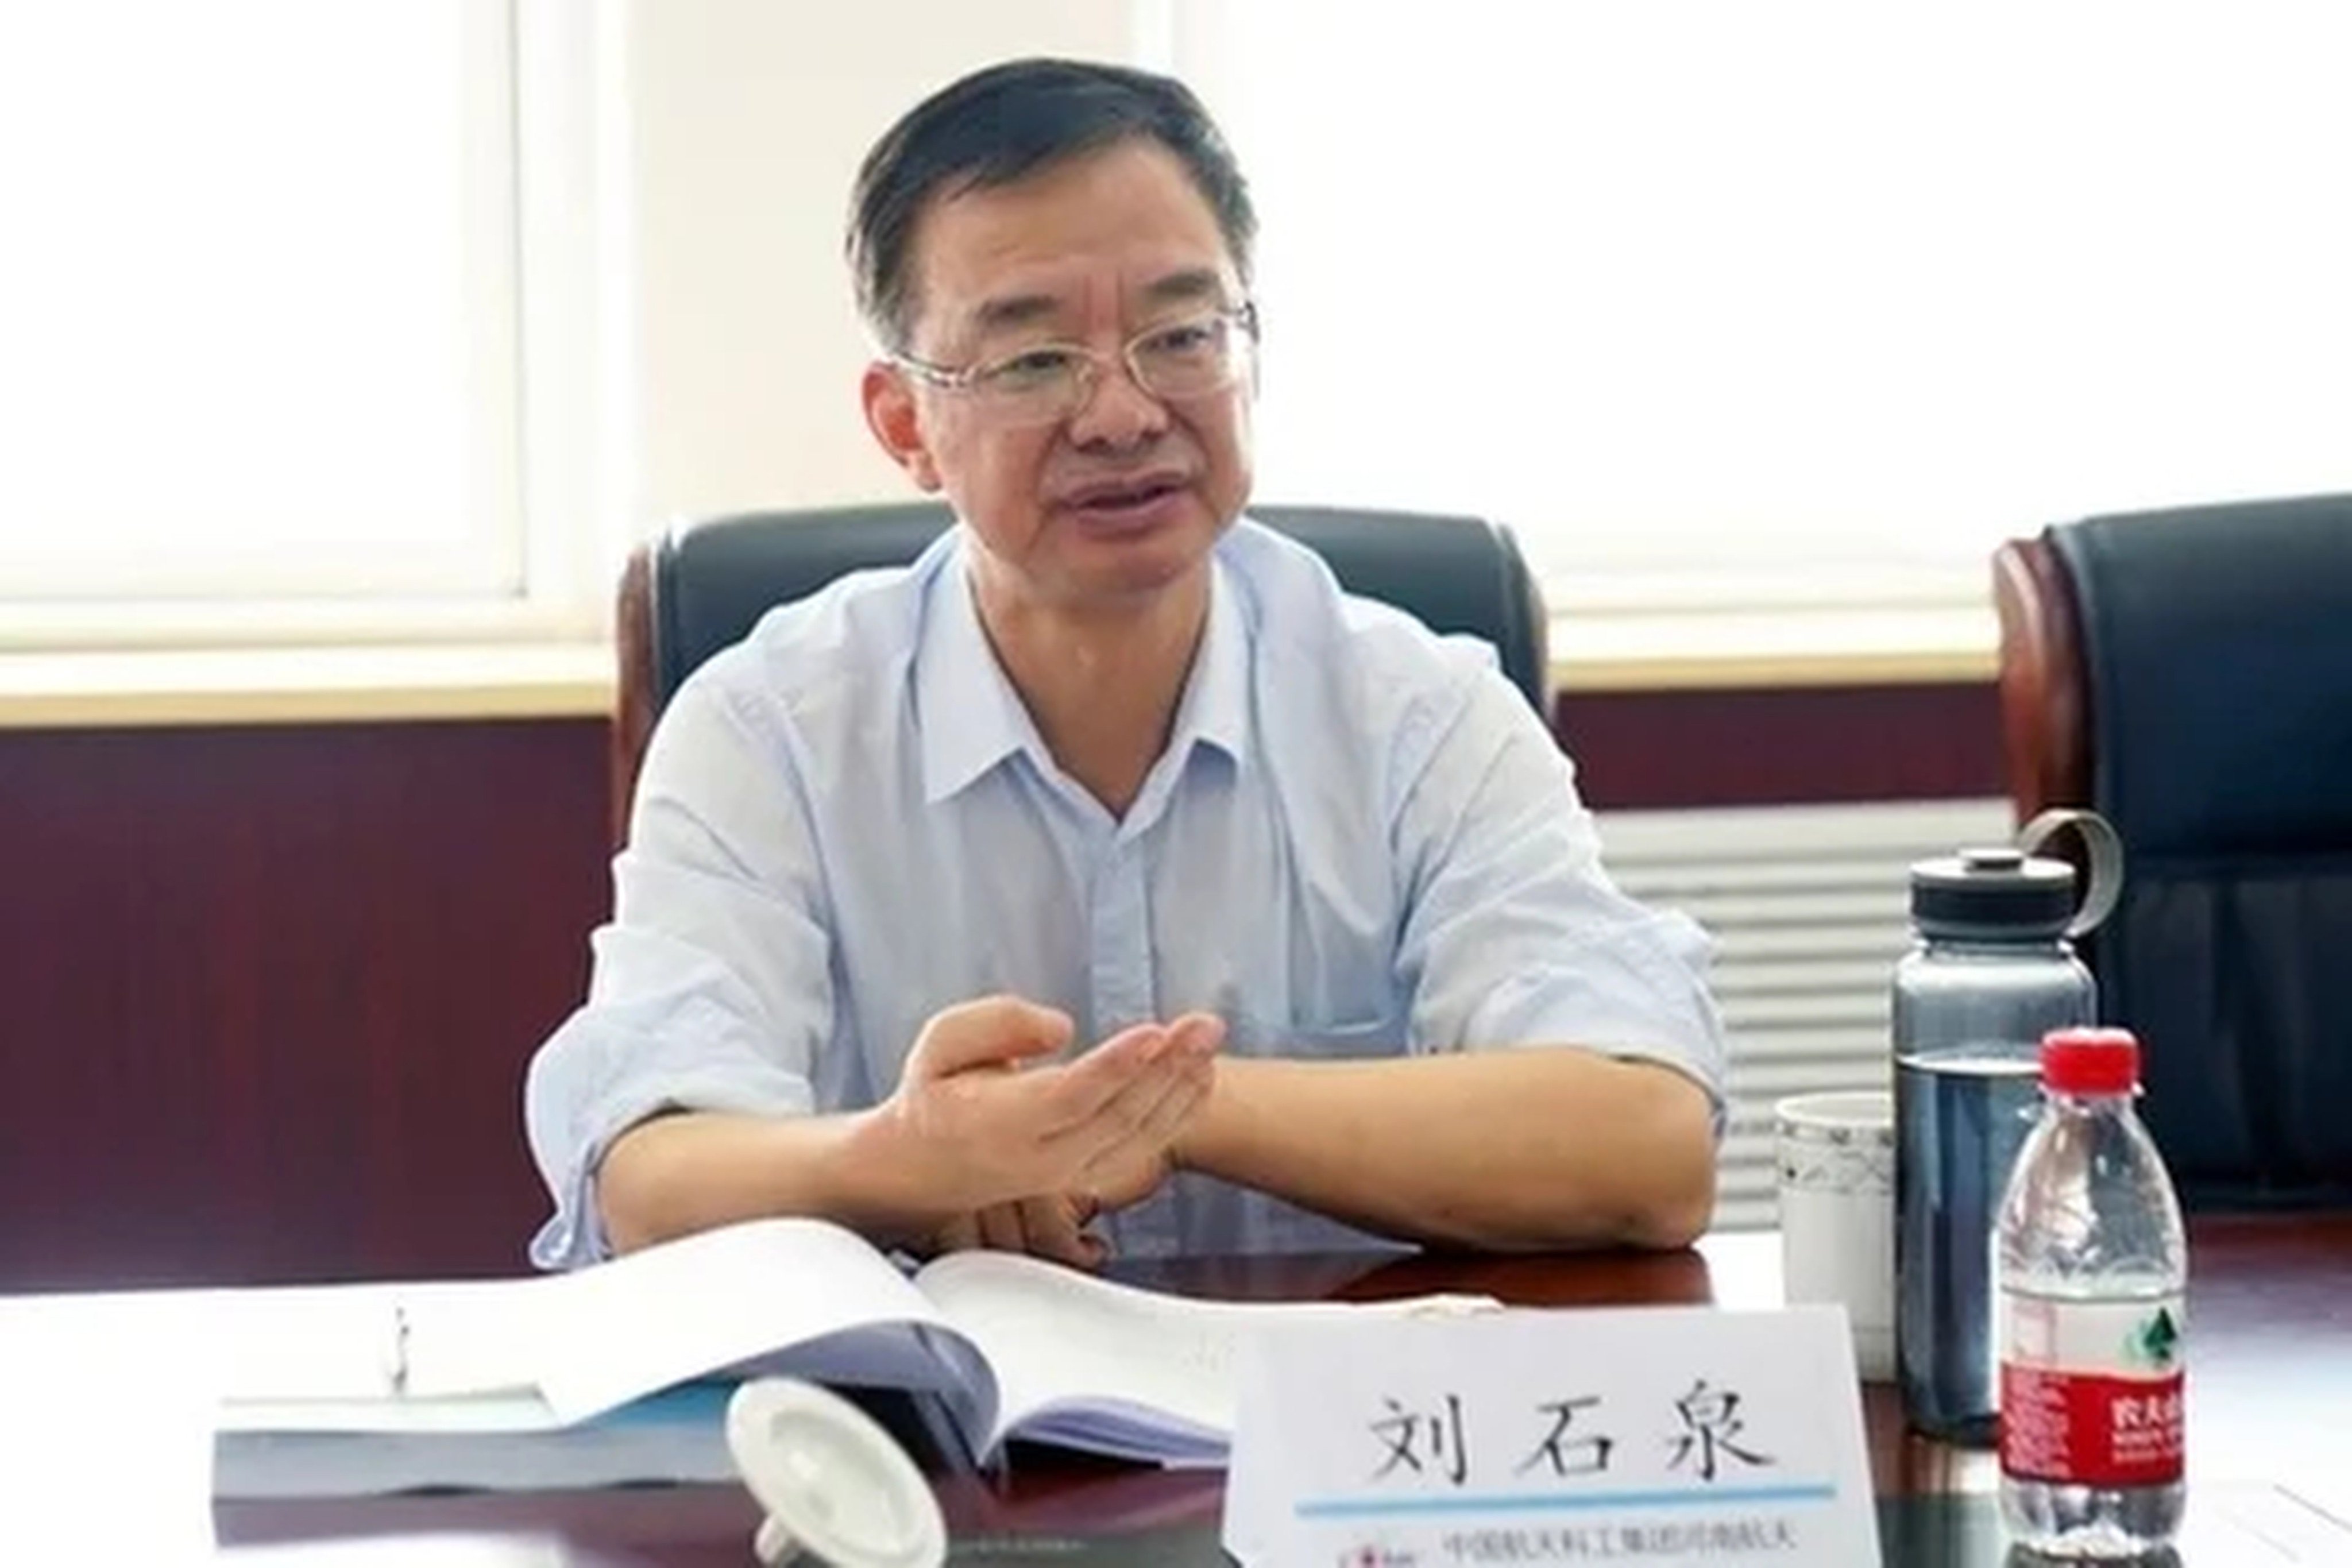 Liu Shiquan, chairman of the board of the China North Industries Group Corporation, is among three aerospace-defence executives named in Chinese state media as being stripped of CPPCC seats. Photo: Weibo